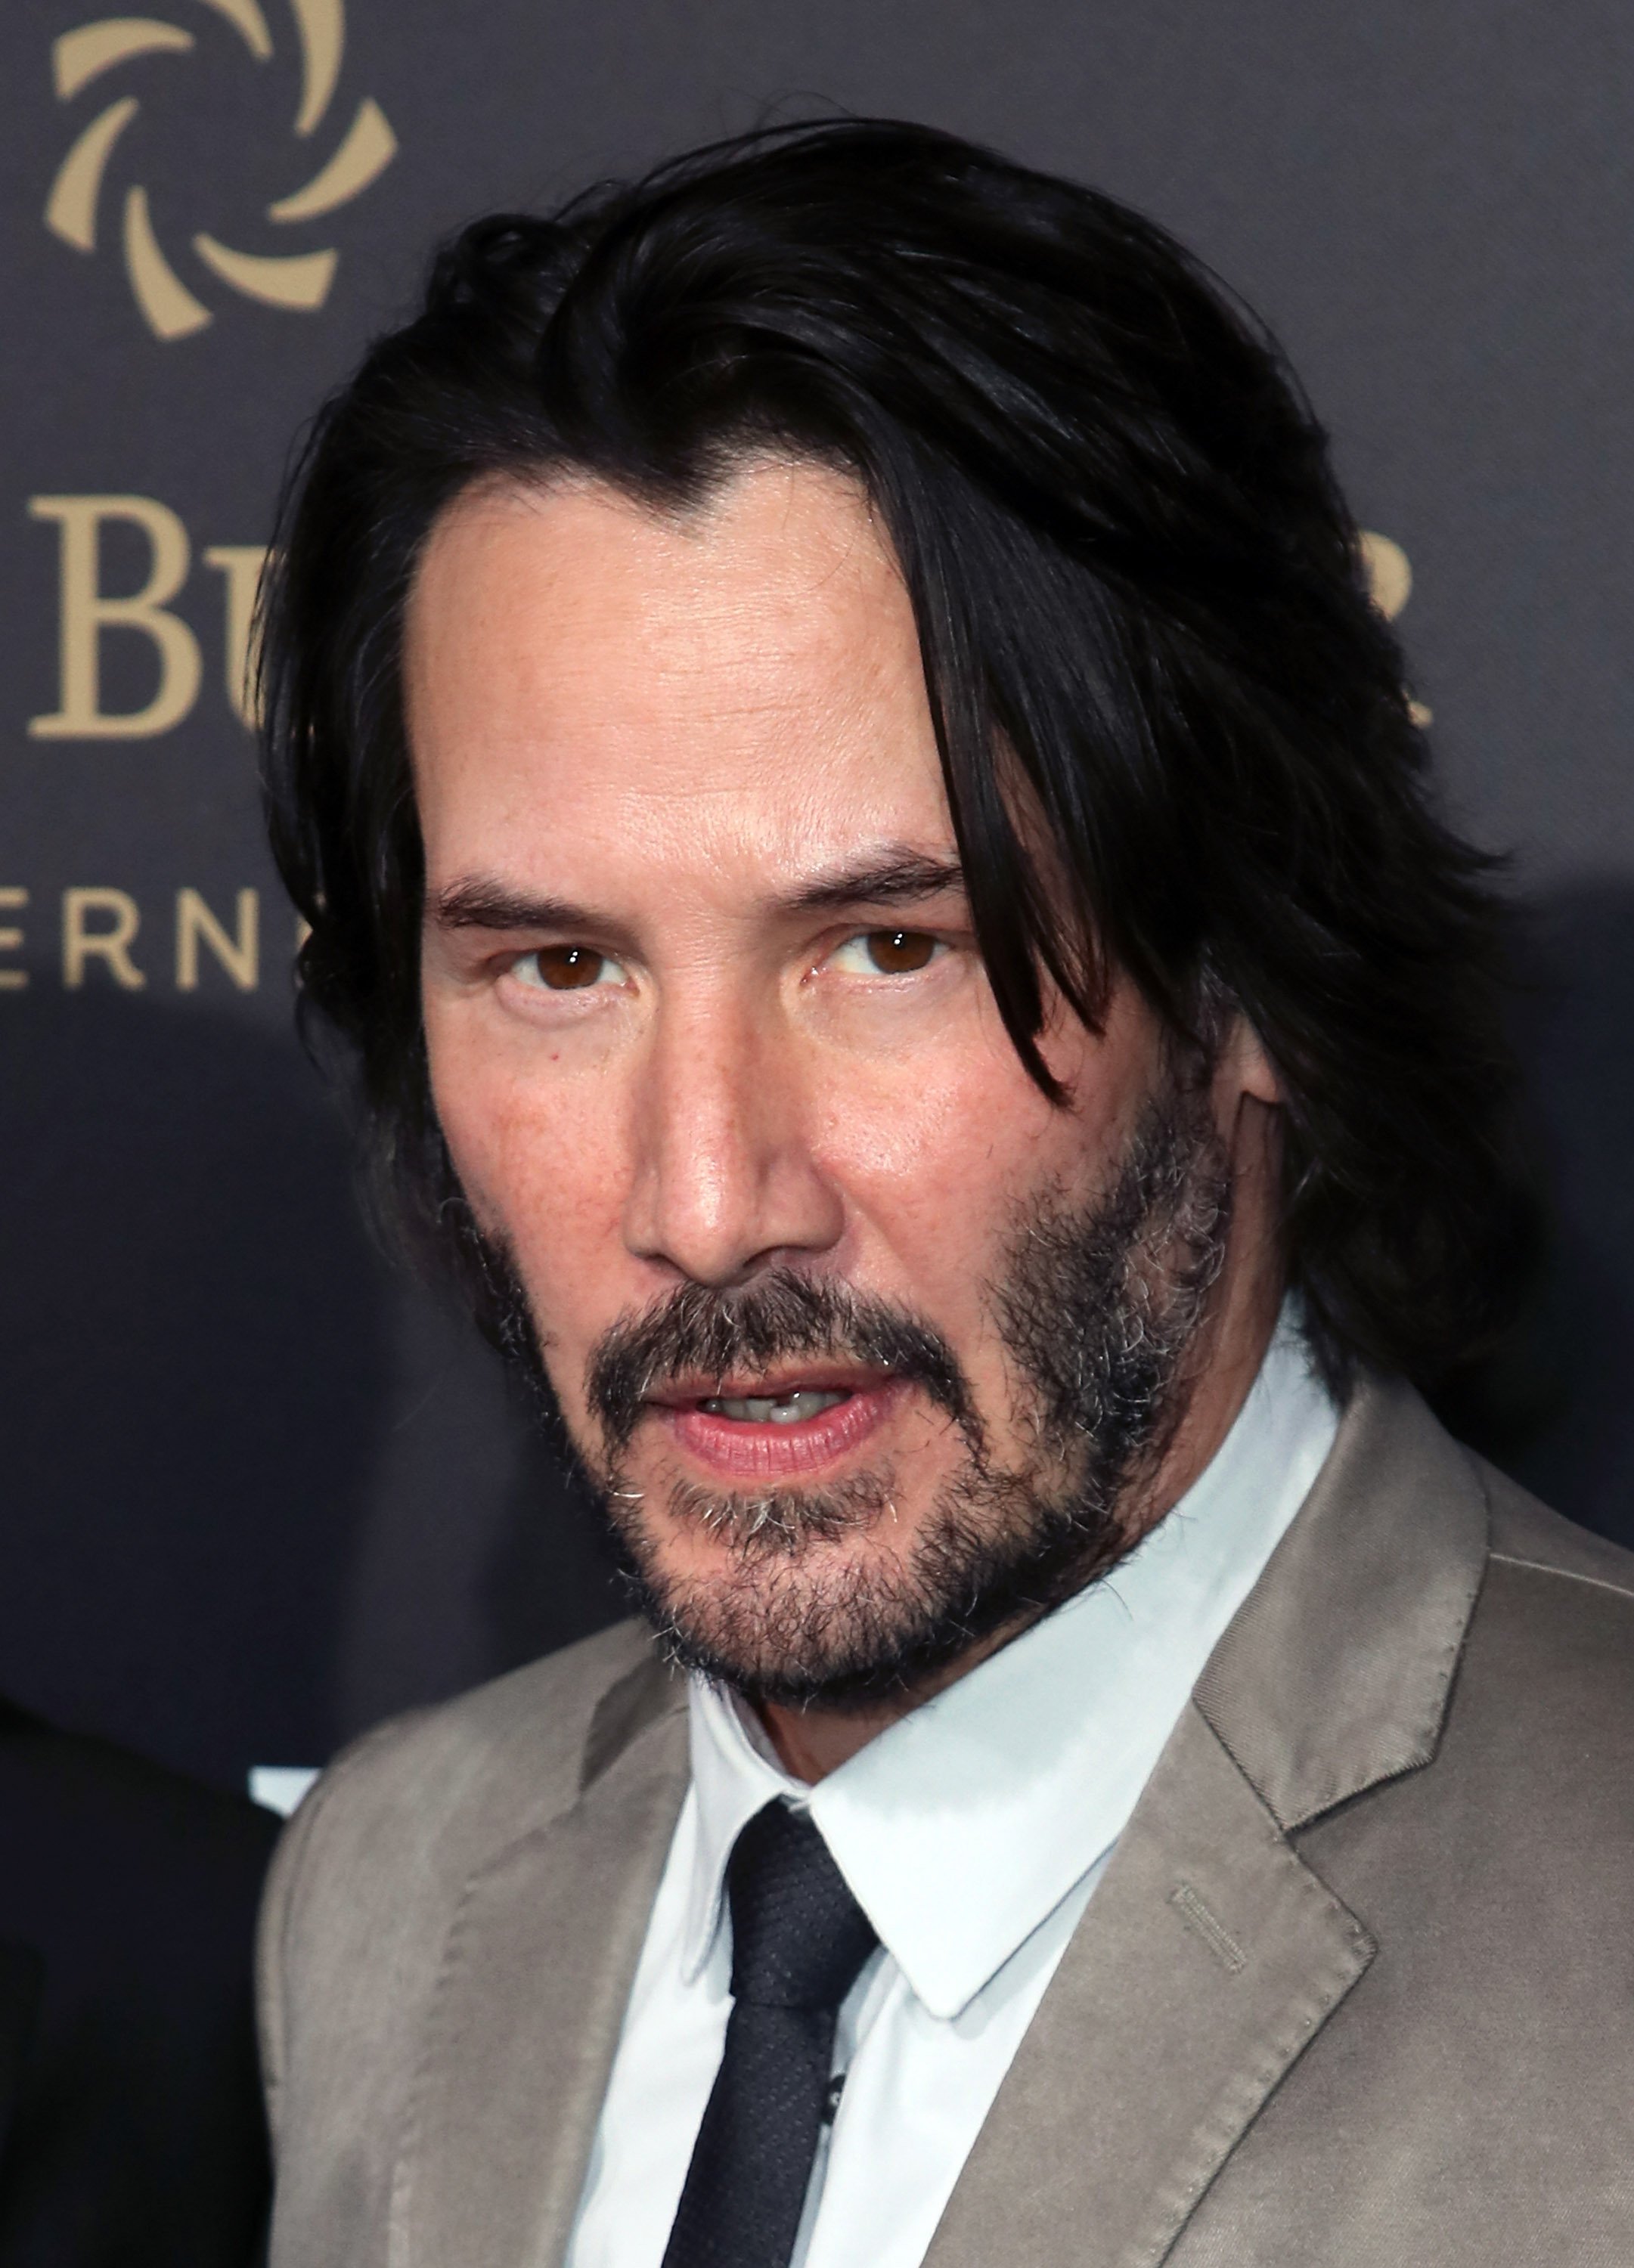 Keanu Reeves in Hollywood im Jahr 2017. | Quelle: Getty Images